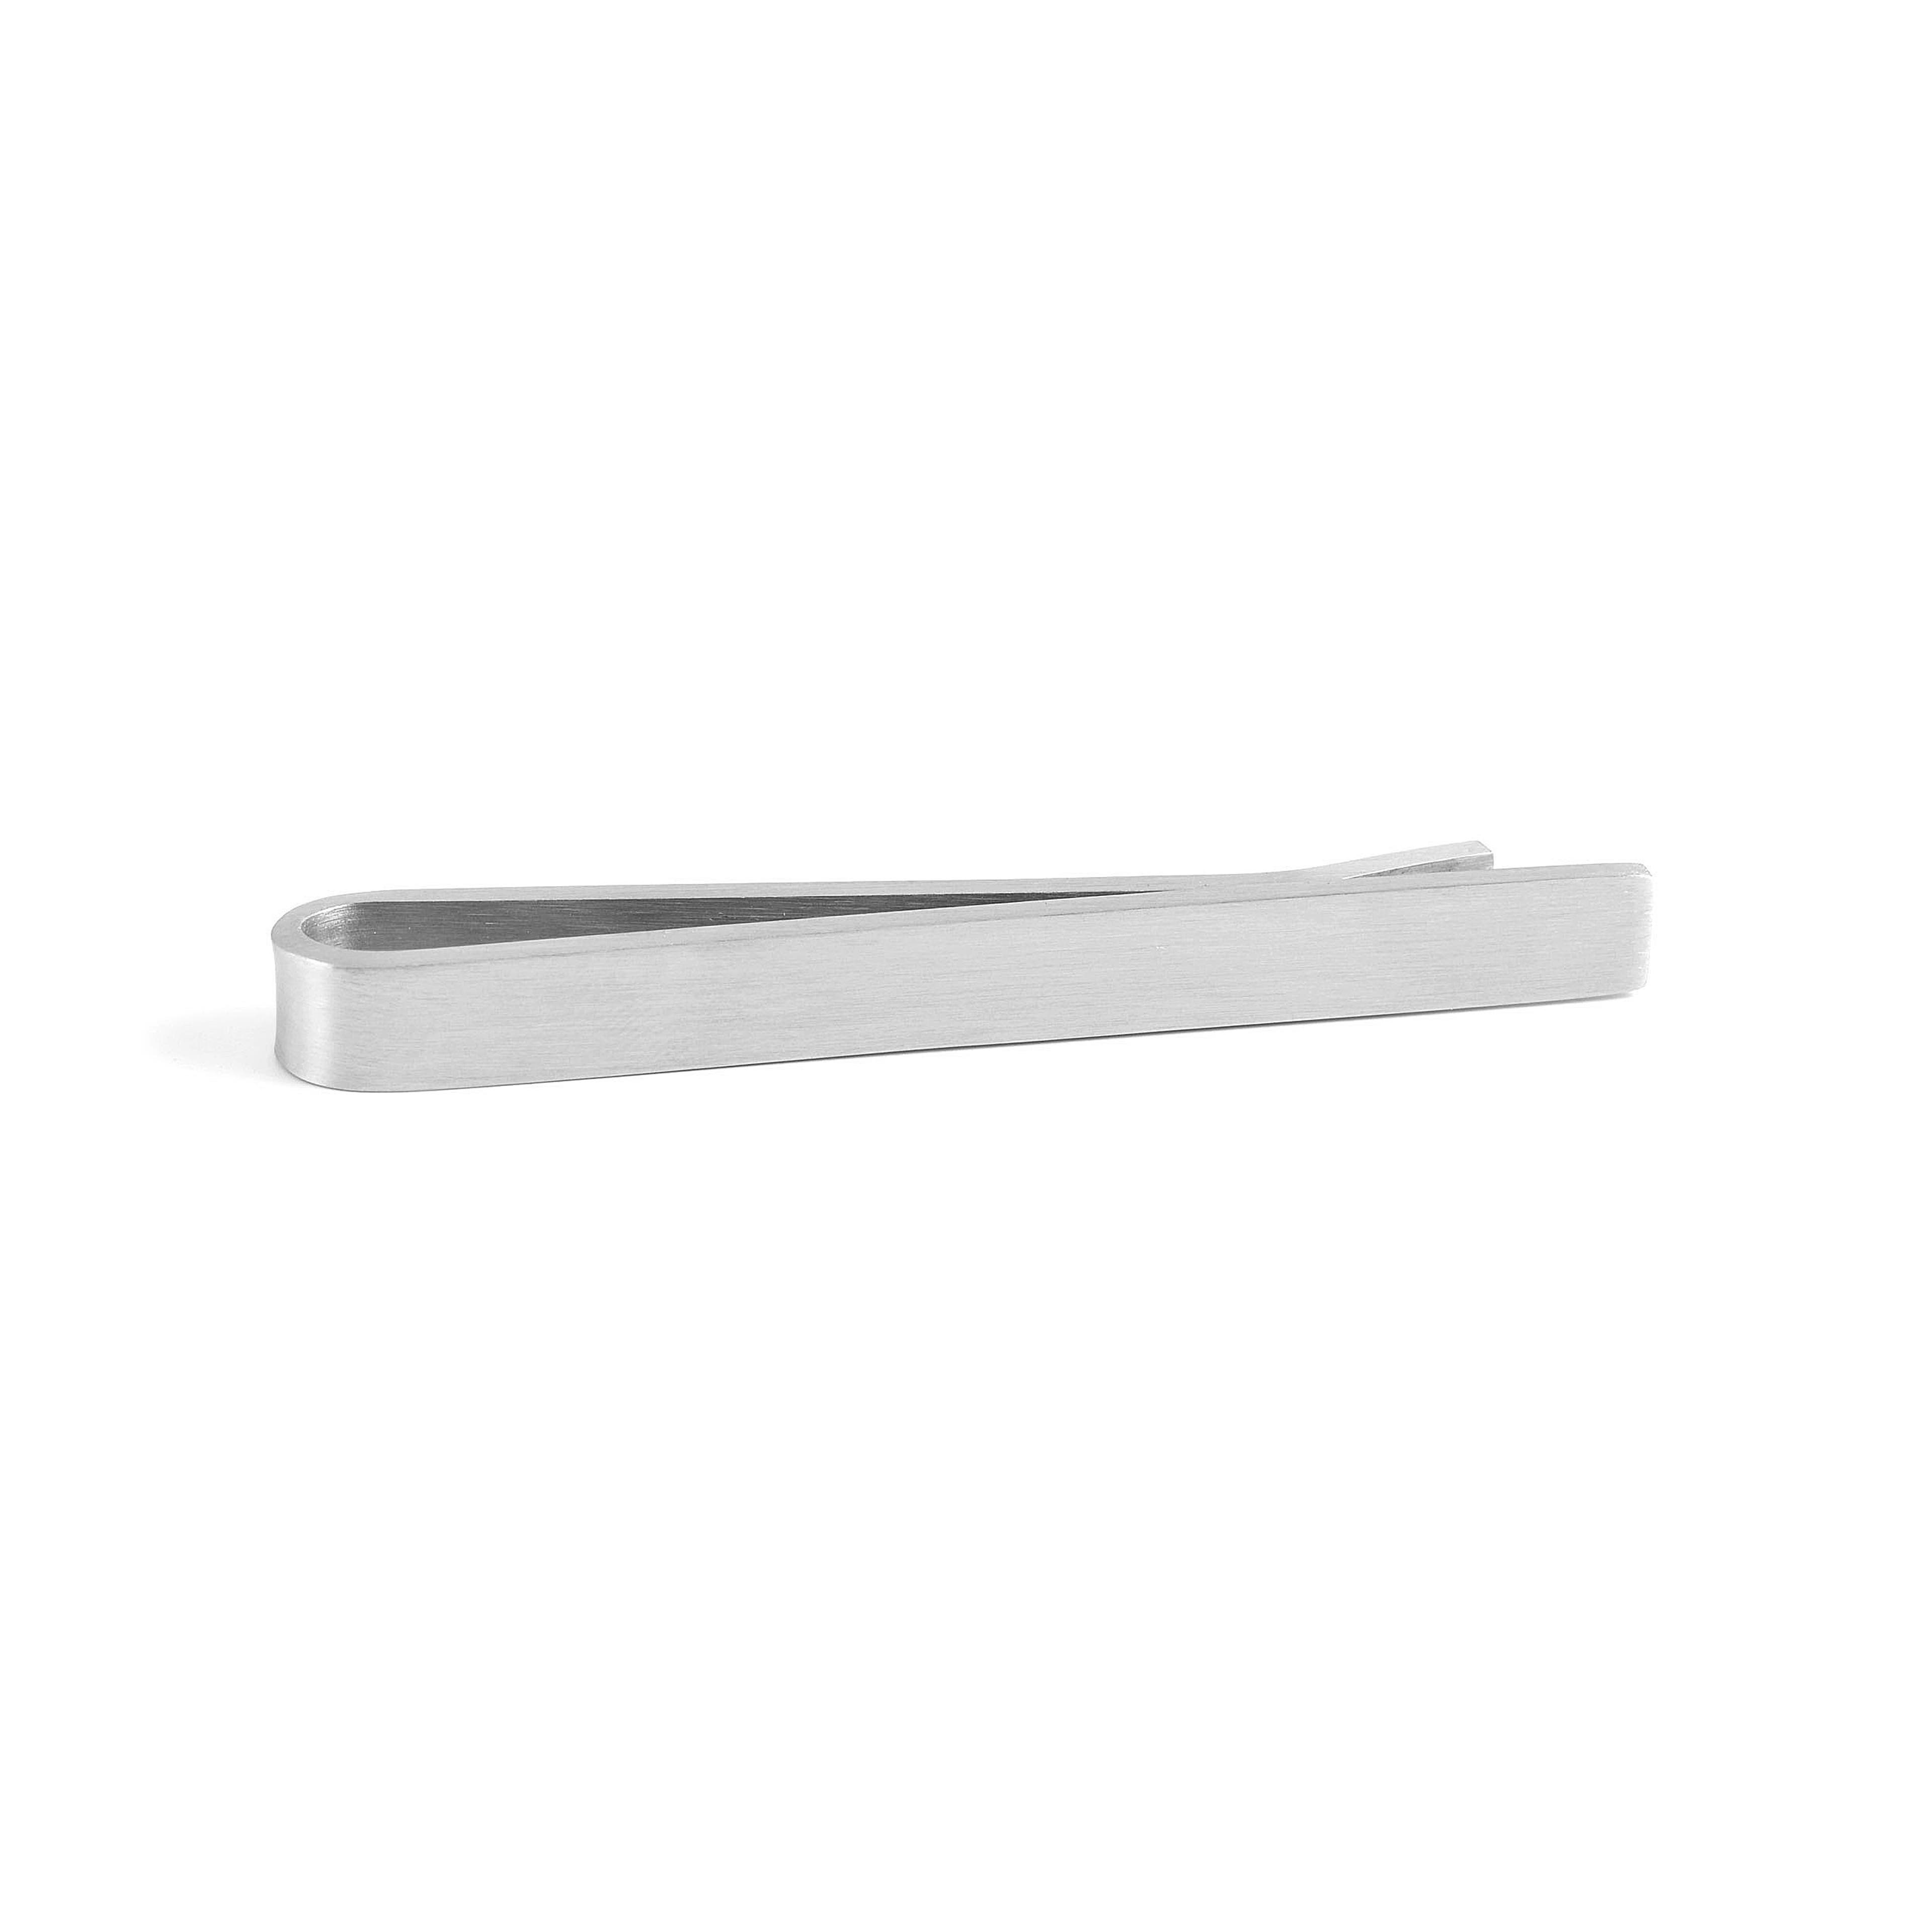 Simple SIlver-Tone Stainless Steel Brushed Tie Bar